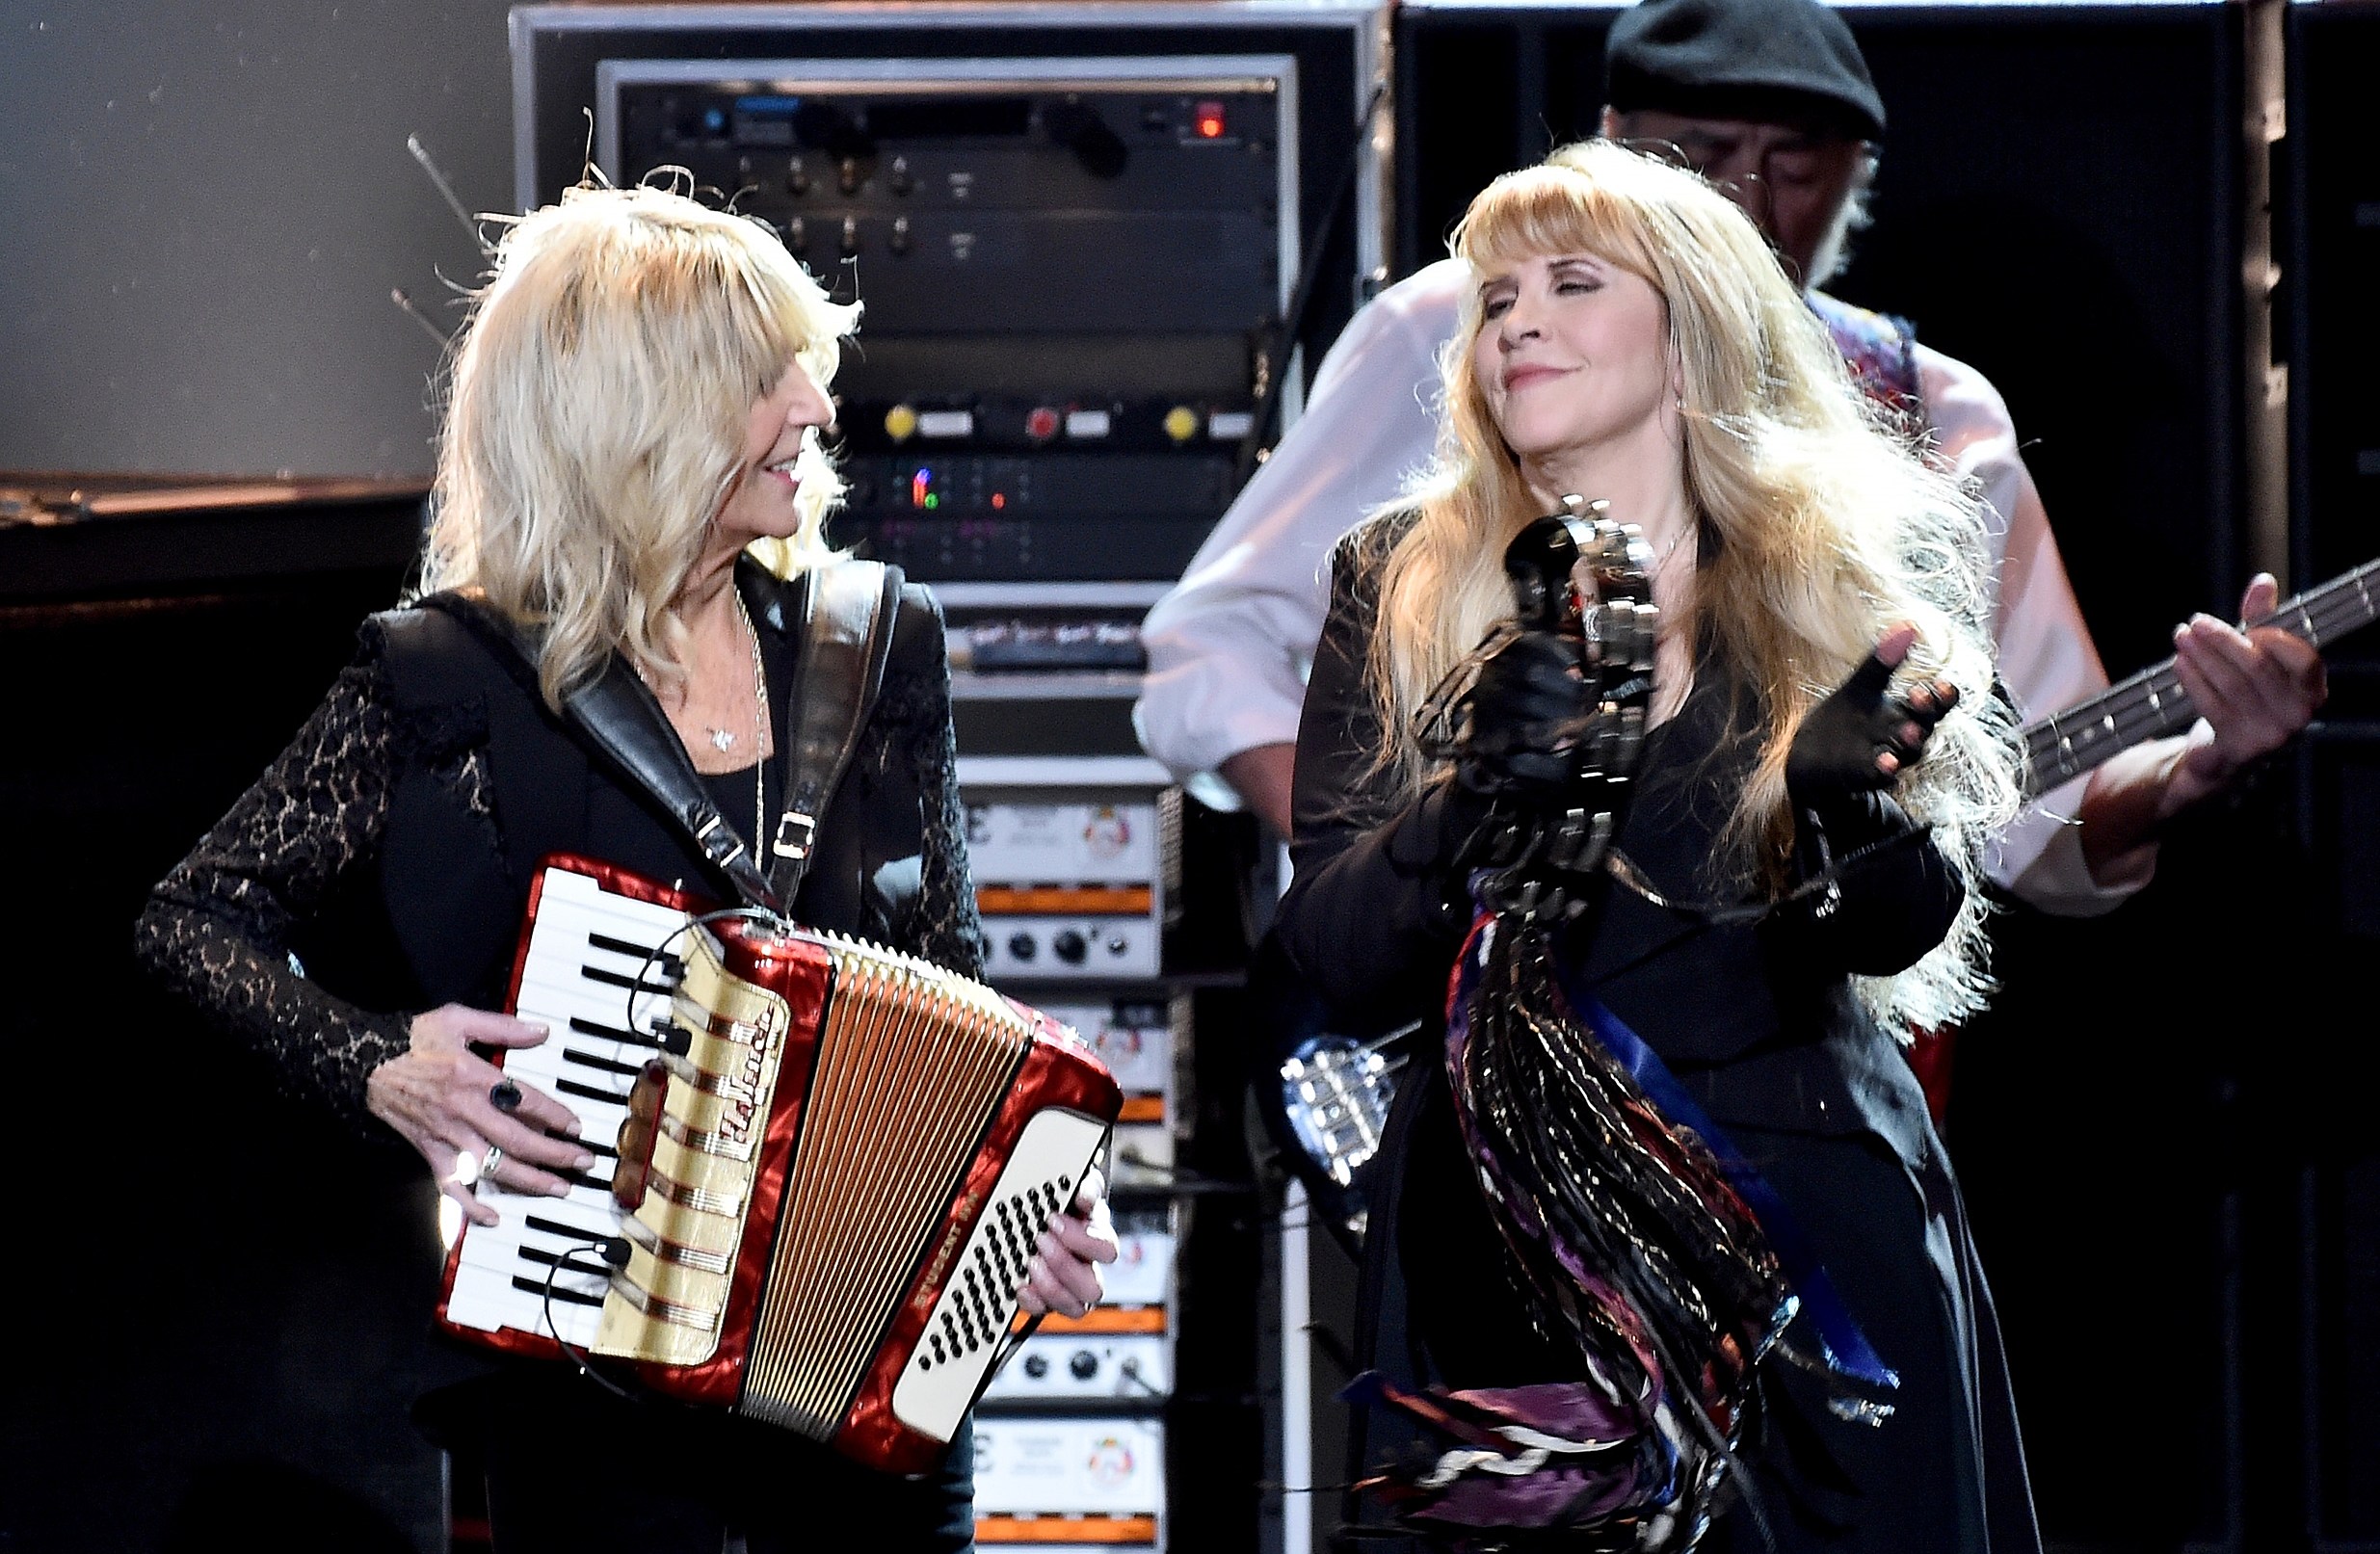  Honorees Christine McVie (L) and Stevie Nicks of music group Fleetwood Mac perform onstage during MusiCares Person of the Year honoring Fleetwood Mac at Radio City Music Hall on January 26, 2018 in New York City. (Photo by Steven Ferdman/Getty Images)